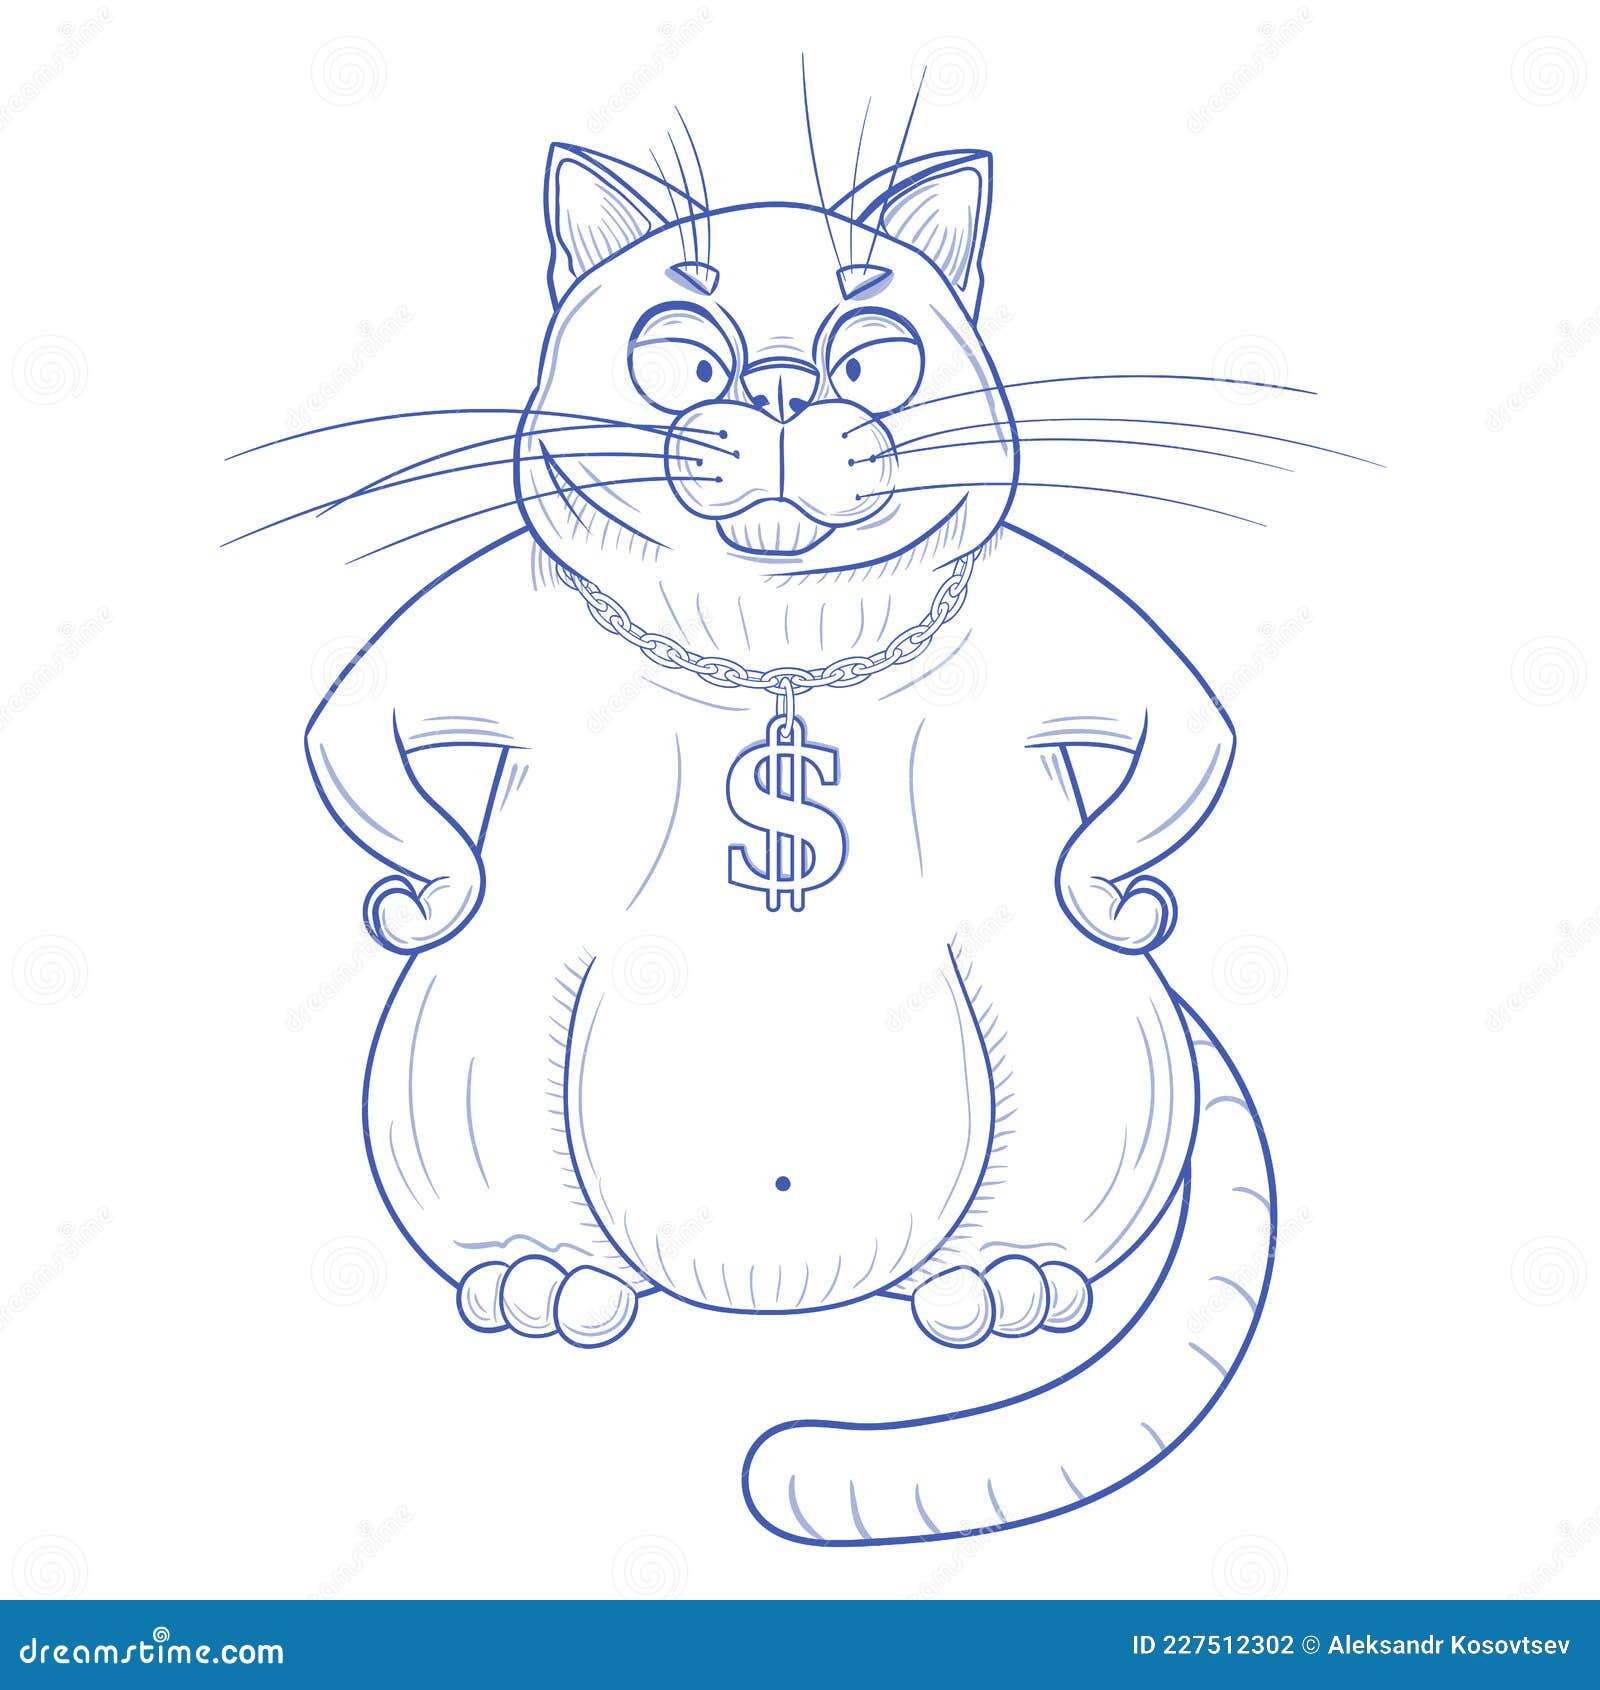 Angry cat hands on hips stock vector. Illustration of bandit - 227512302